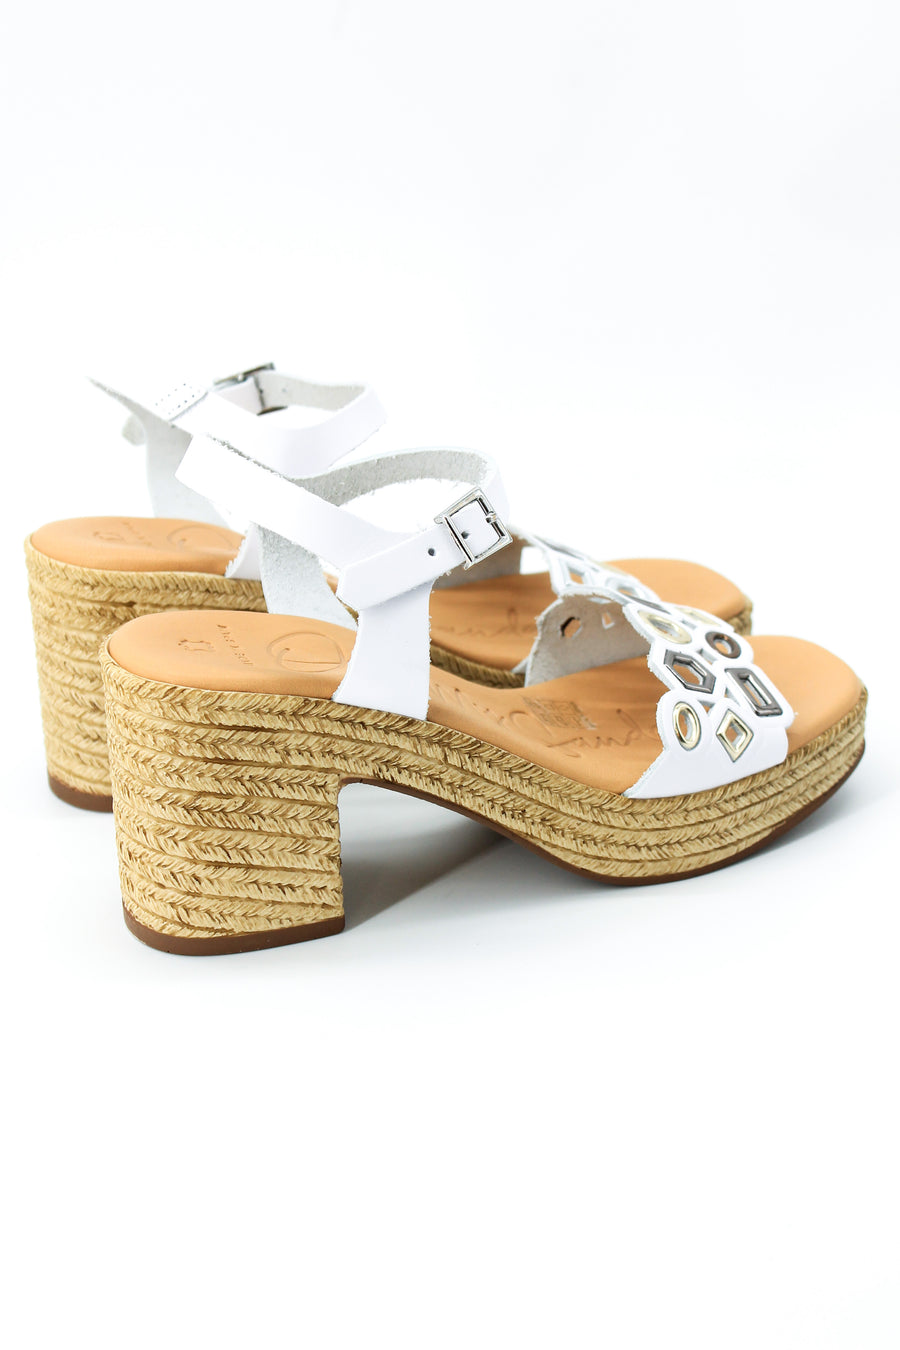 Oh My Sandals 5232 White